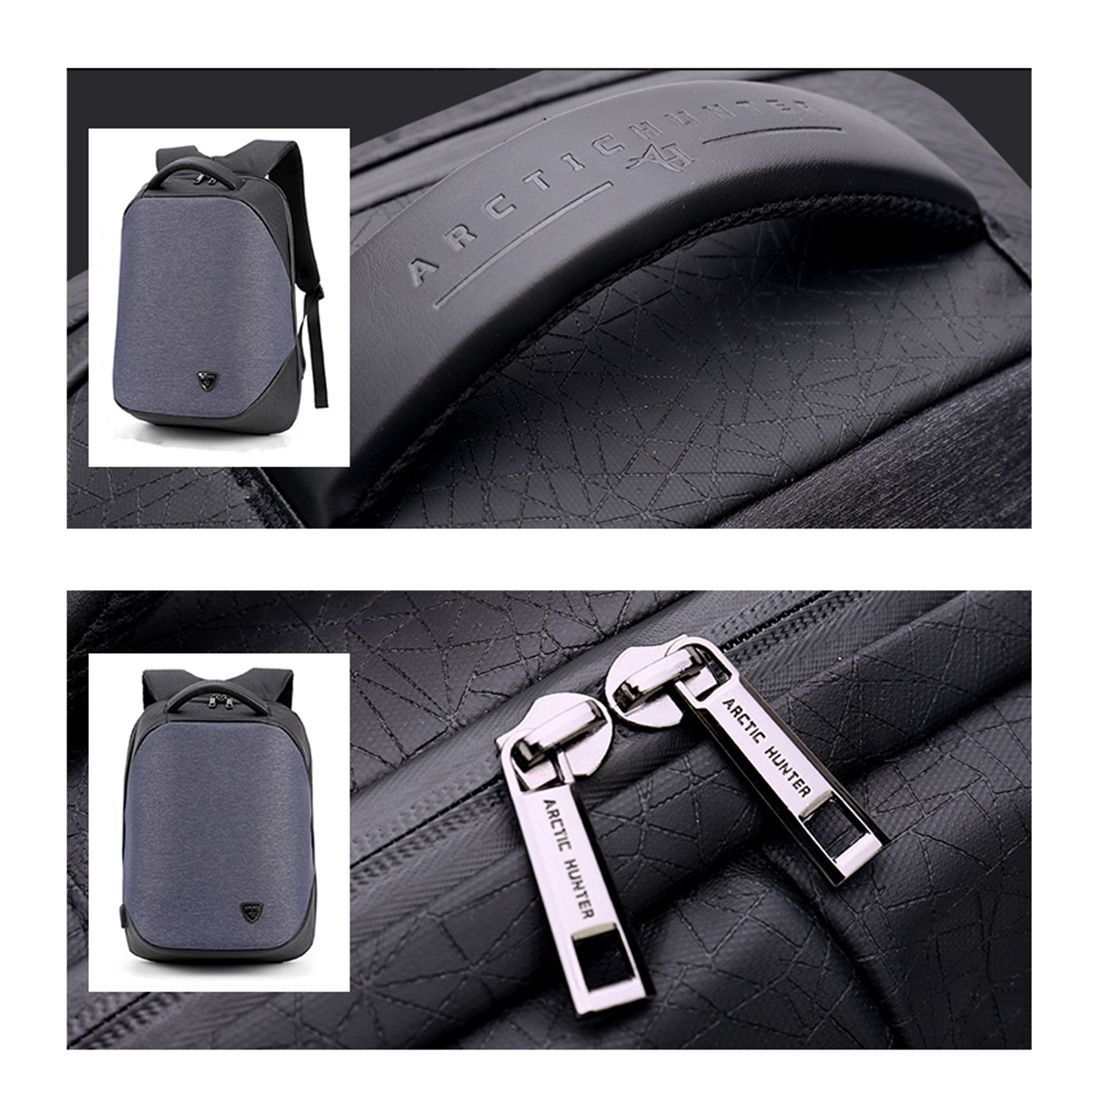 multifunctional USB charging anti-theft bag business backpack male computer bag travel bag backpack - ebowsos